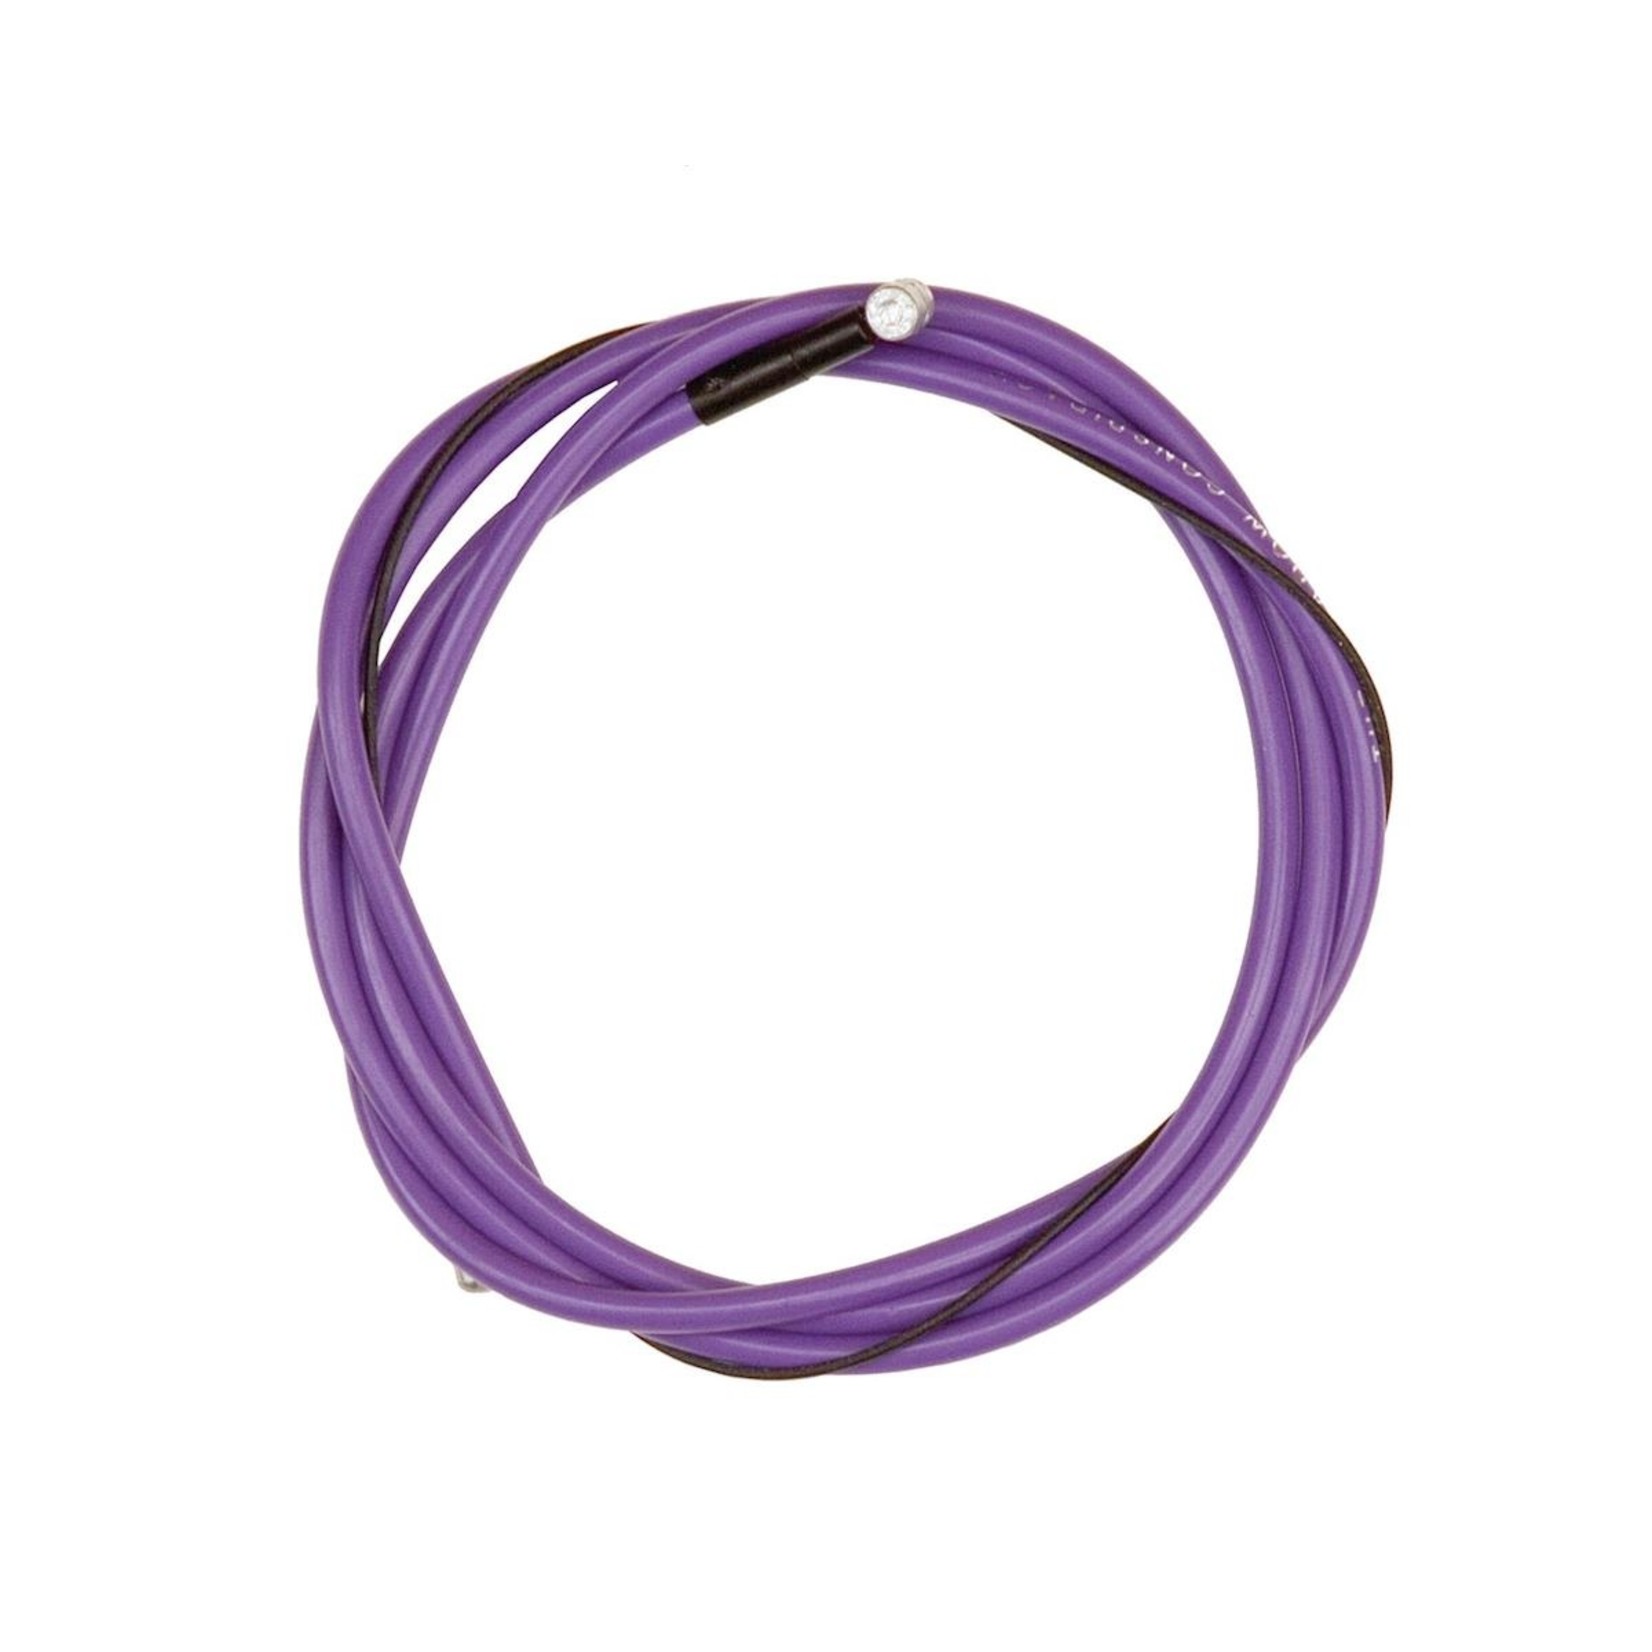 The Shadow Conspiracy Shadow - Linear Cable